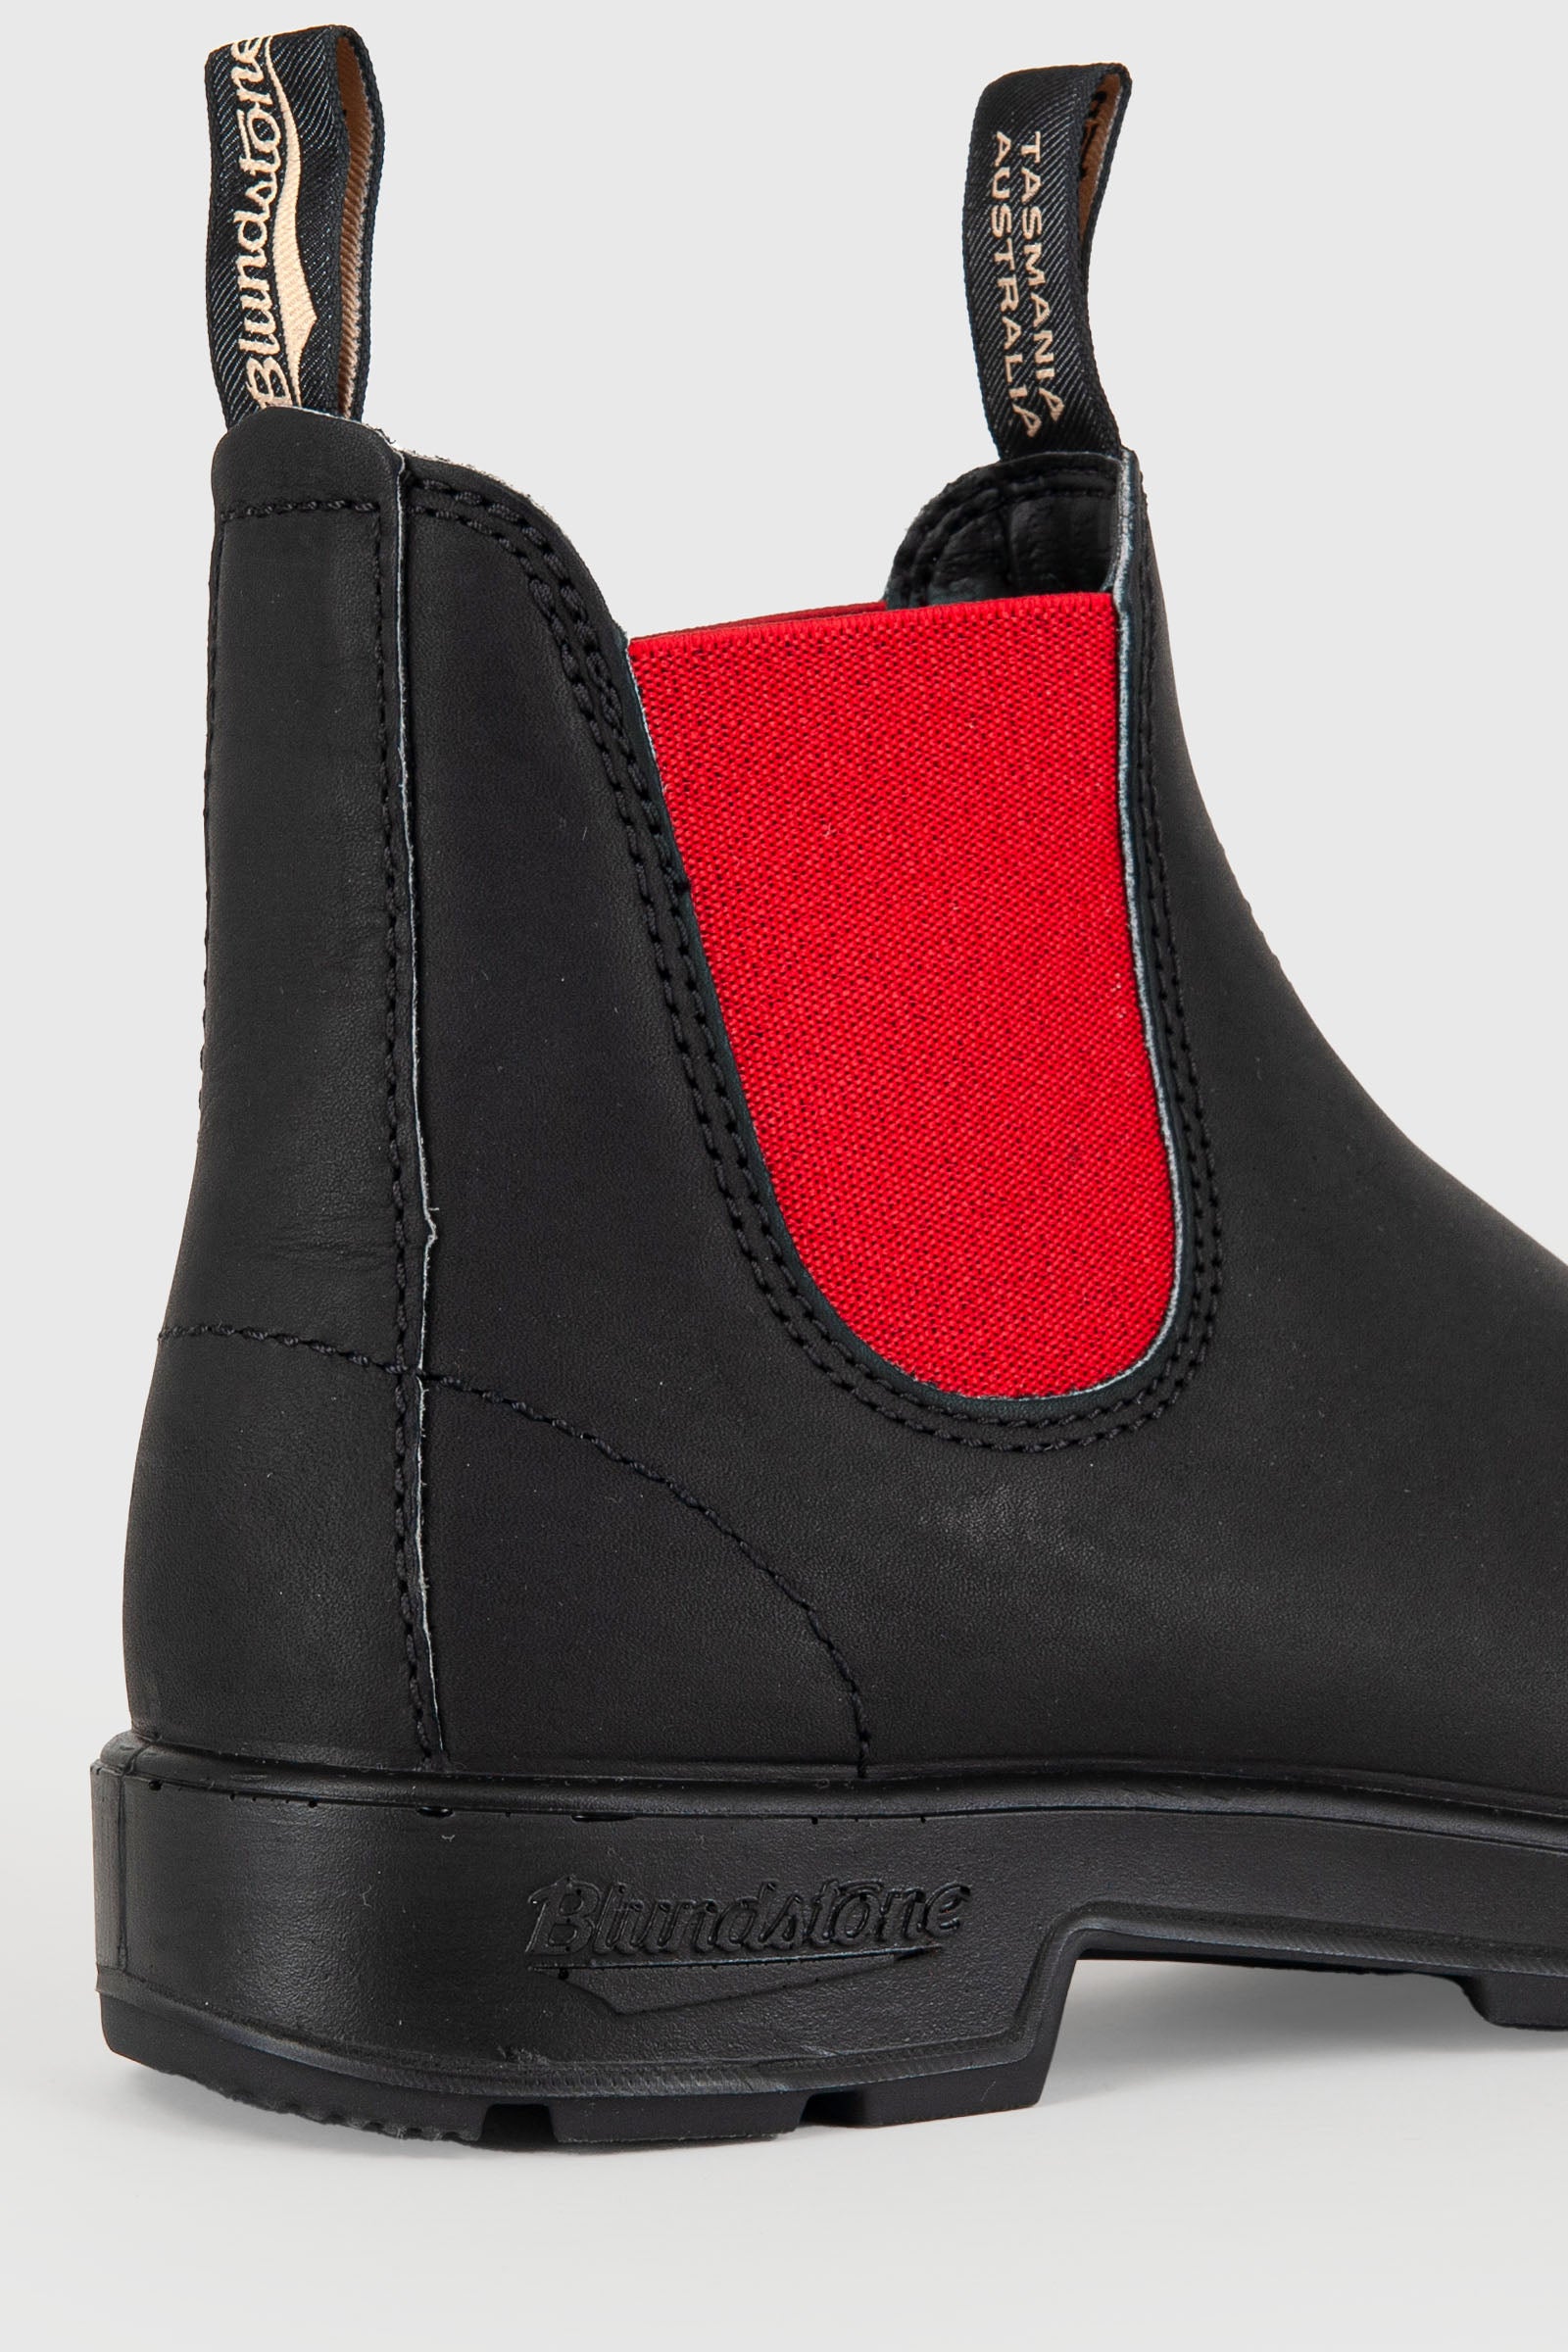 Blundstone Beatle Ankle Boot 508 Leather Black/Red - 2